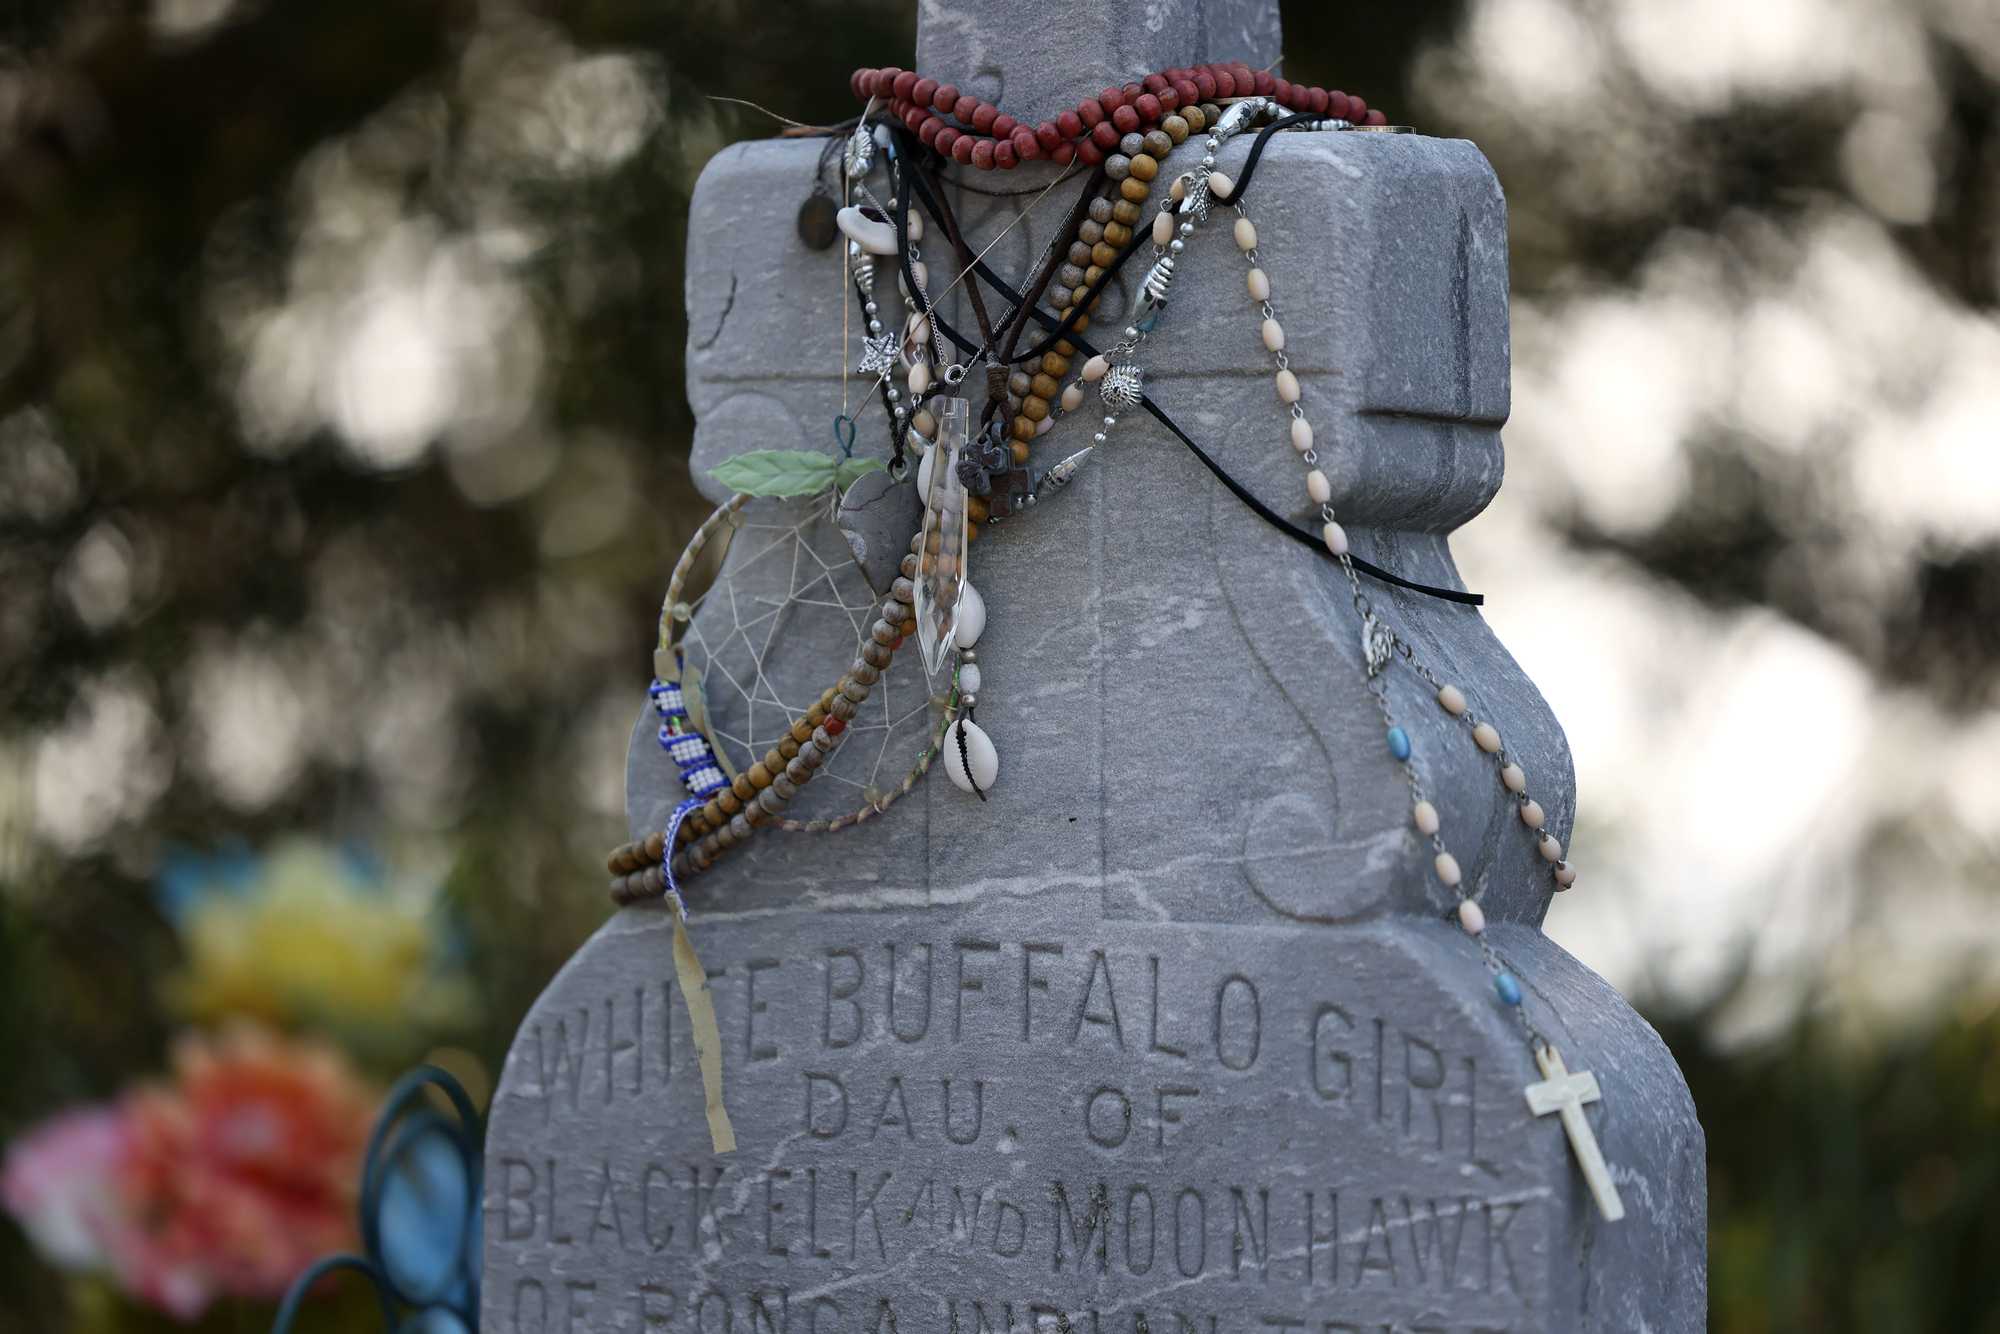 According to government records and tribal accounts, White Buffalo Girl was the second child to die on the forced march to Oklahoma. She succumbed four days in, shortly after crossing the Elkhorn River.